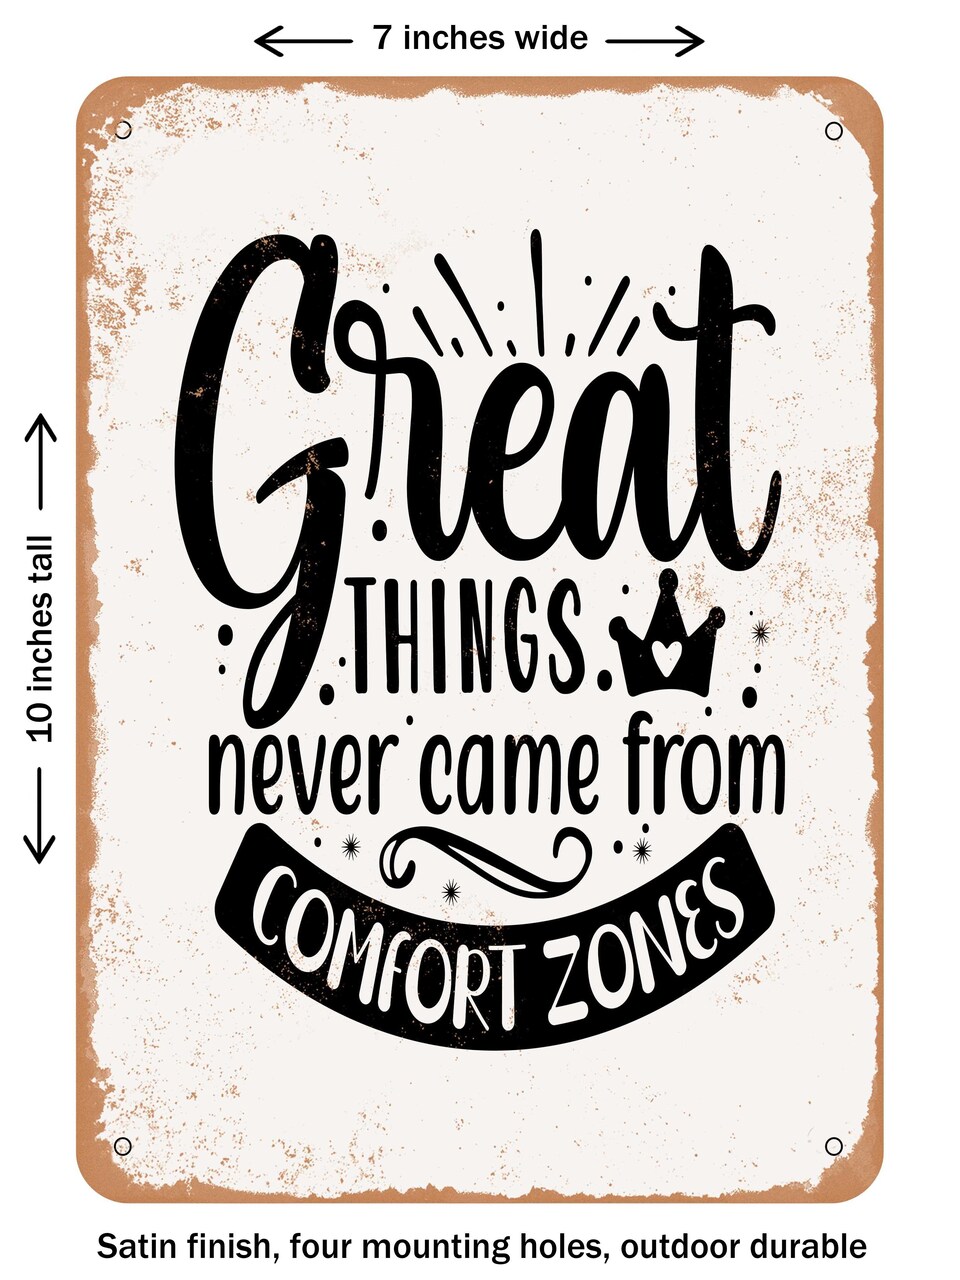 DECORATIVE METAL SIGN - Great Things Never Came From Comfort Zones  - Vintage Rusty Look